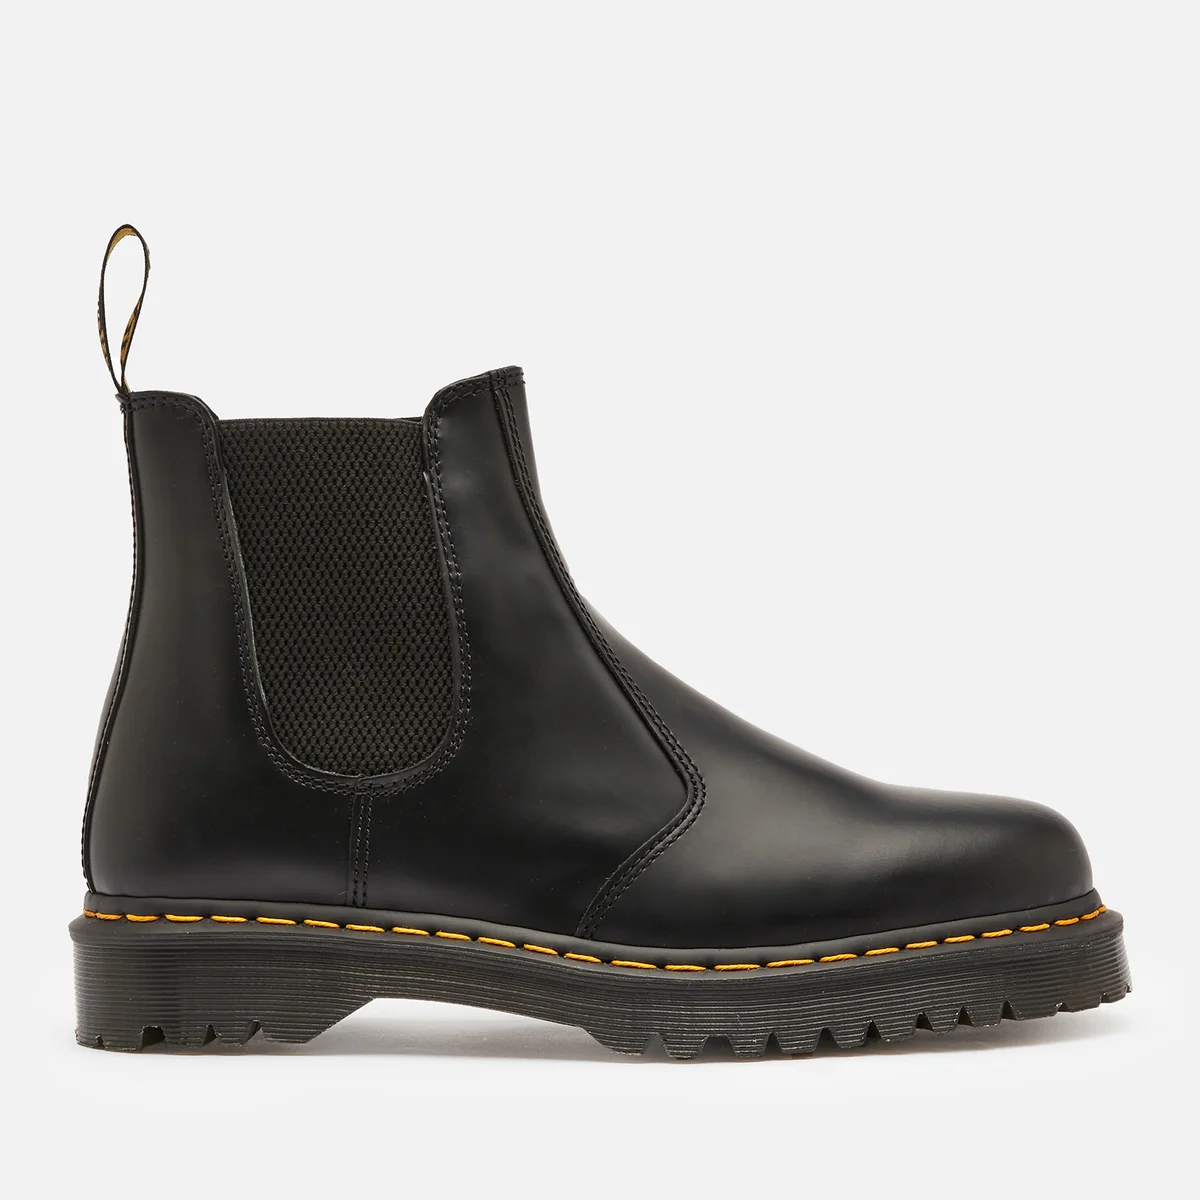 Dr. Martens 2976 Bex Smooth Leather Chelsea Boots - Black Image 1